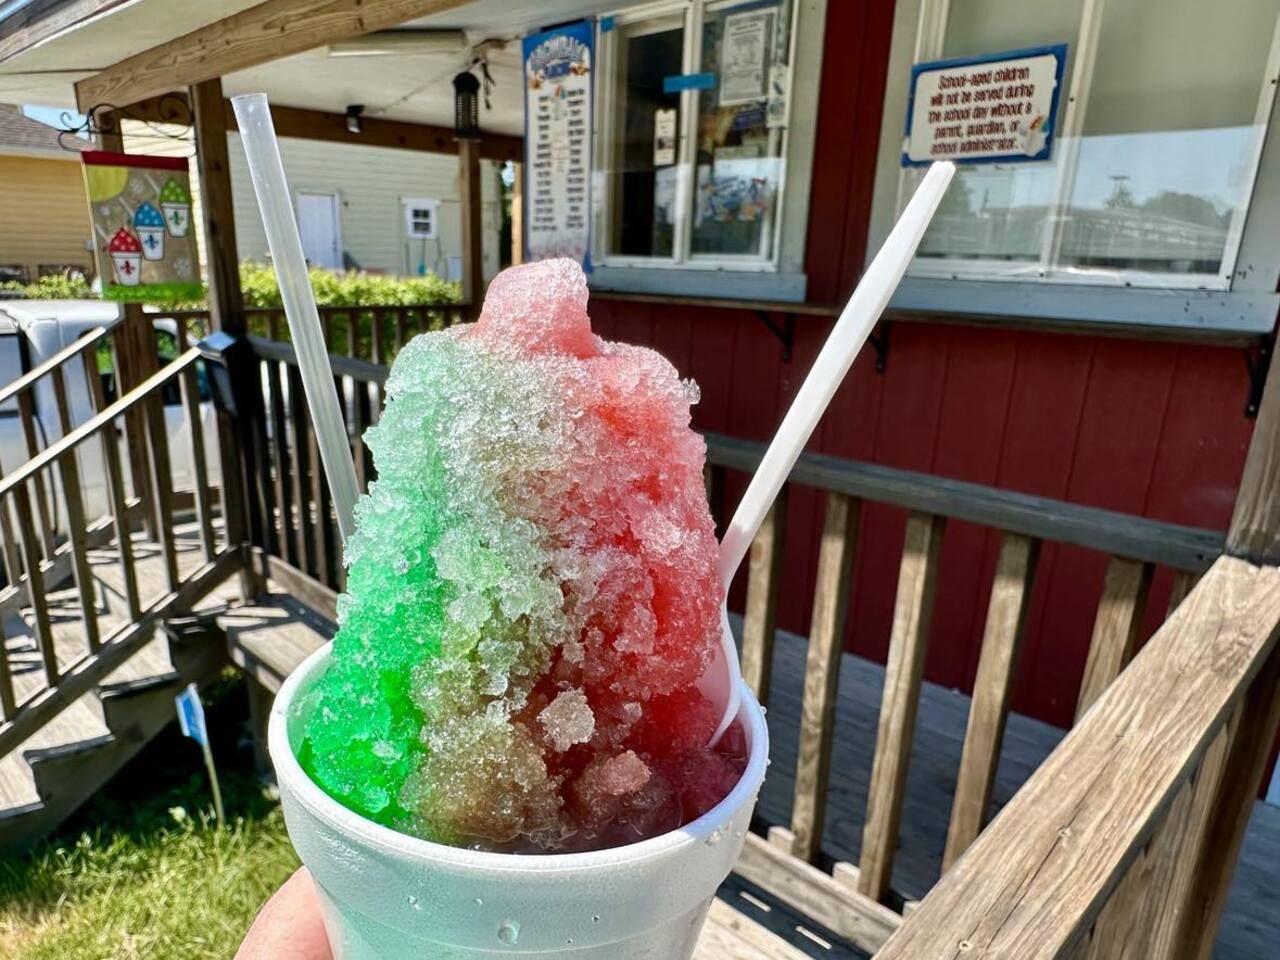 Photo shows a green and pink snoball in front of a wooden stand